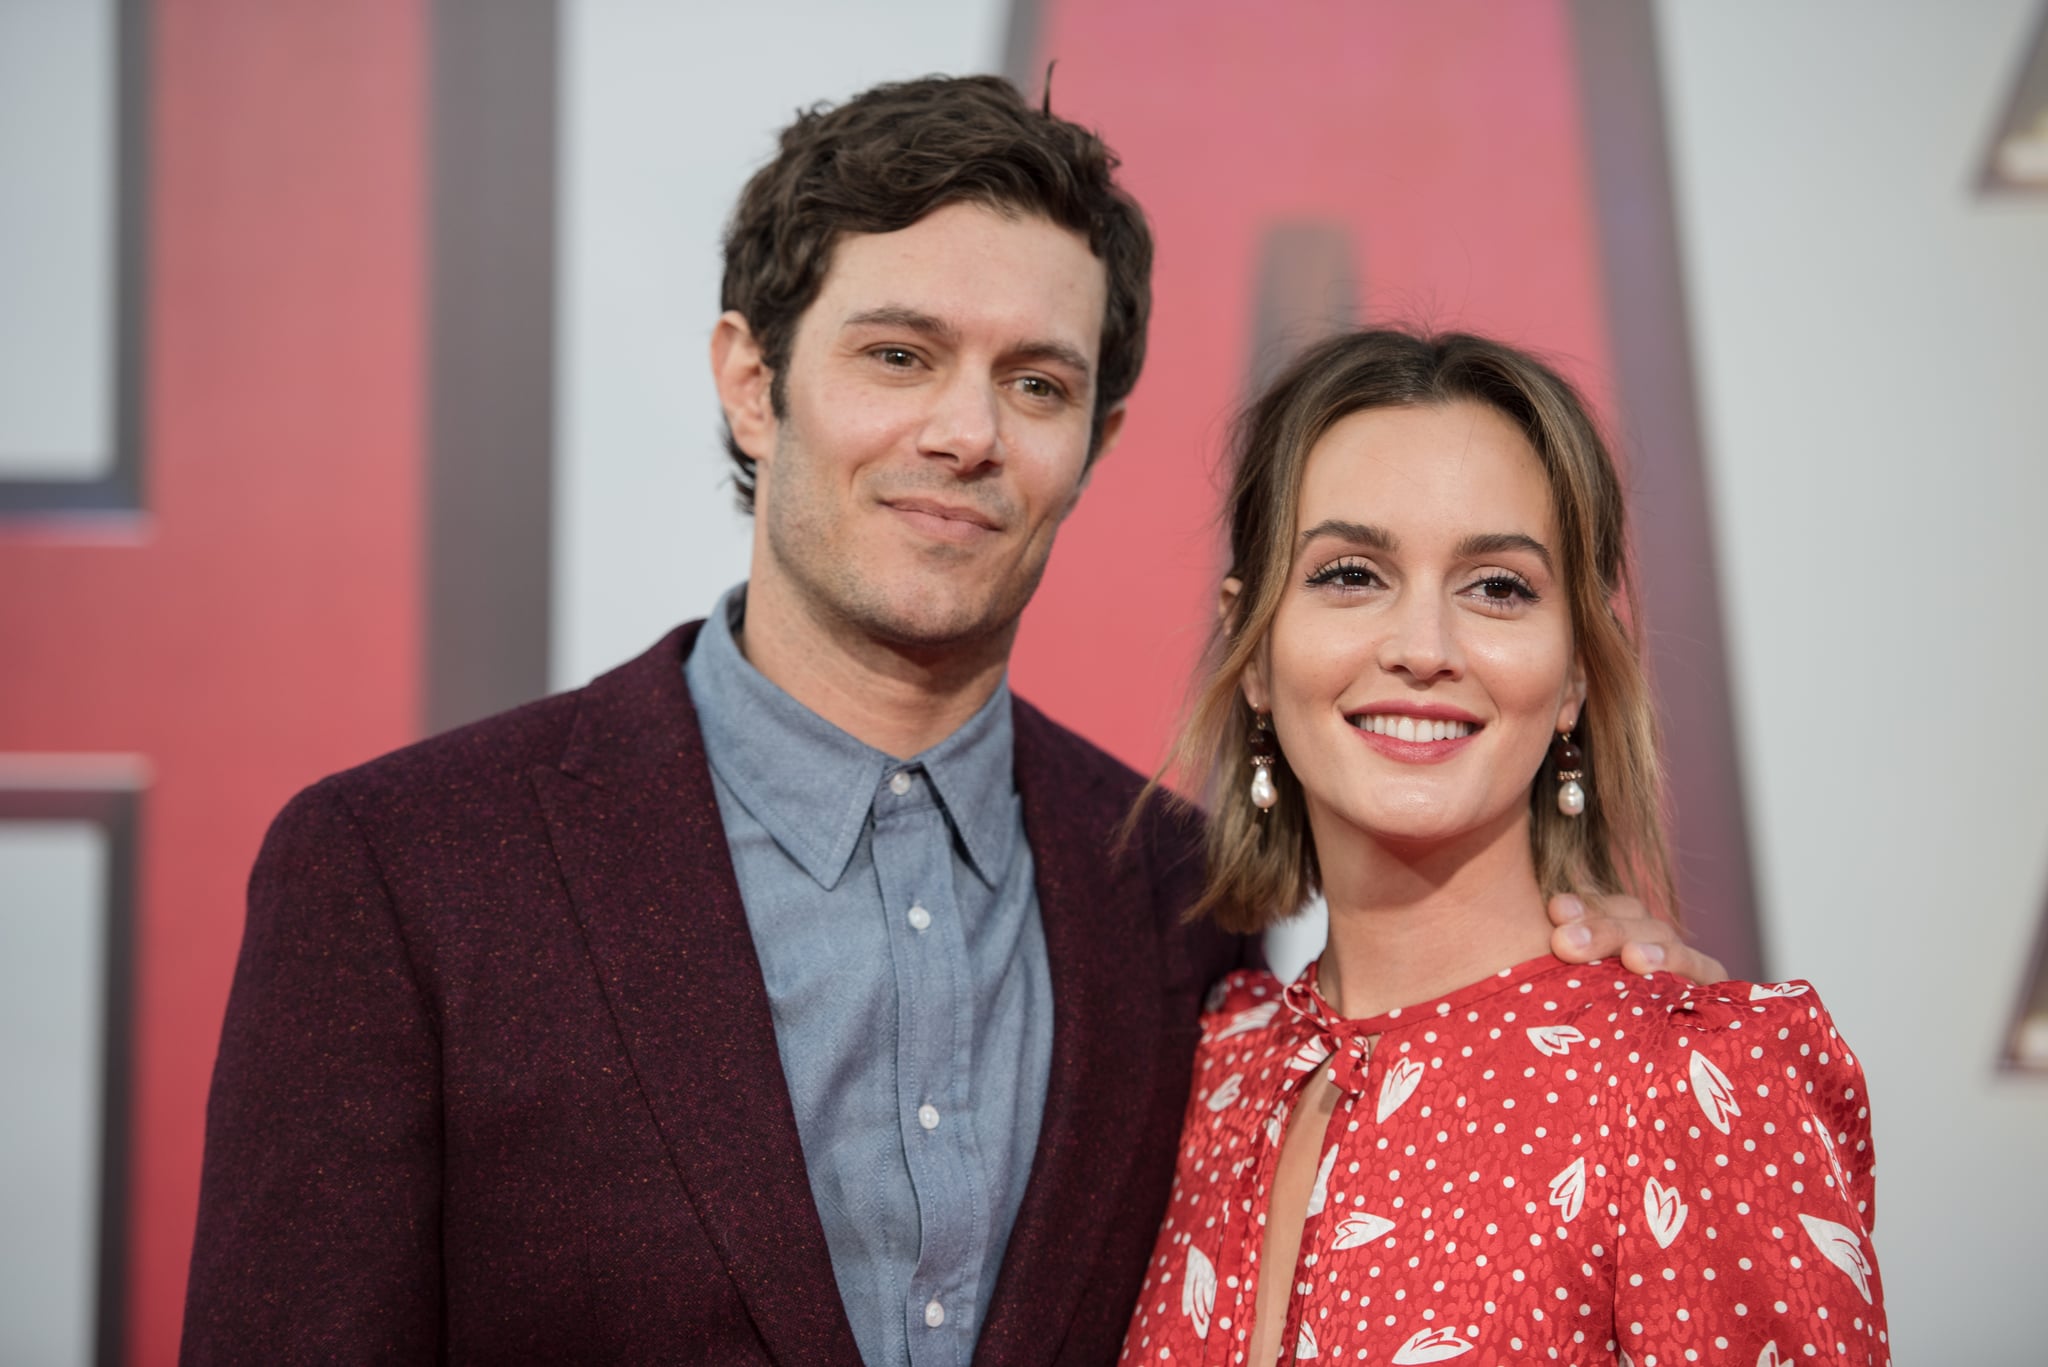 Leighton Meester and Adam Brody Welcome a Baby Boy: “He’s a Dream”